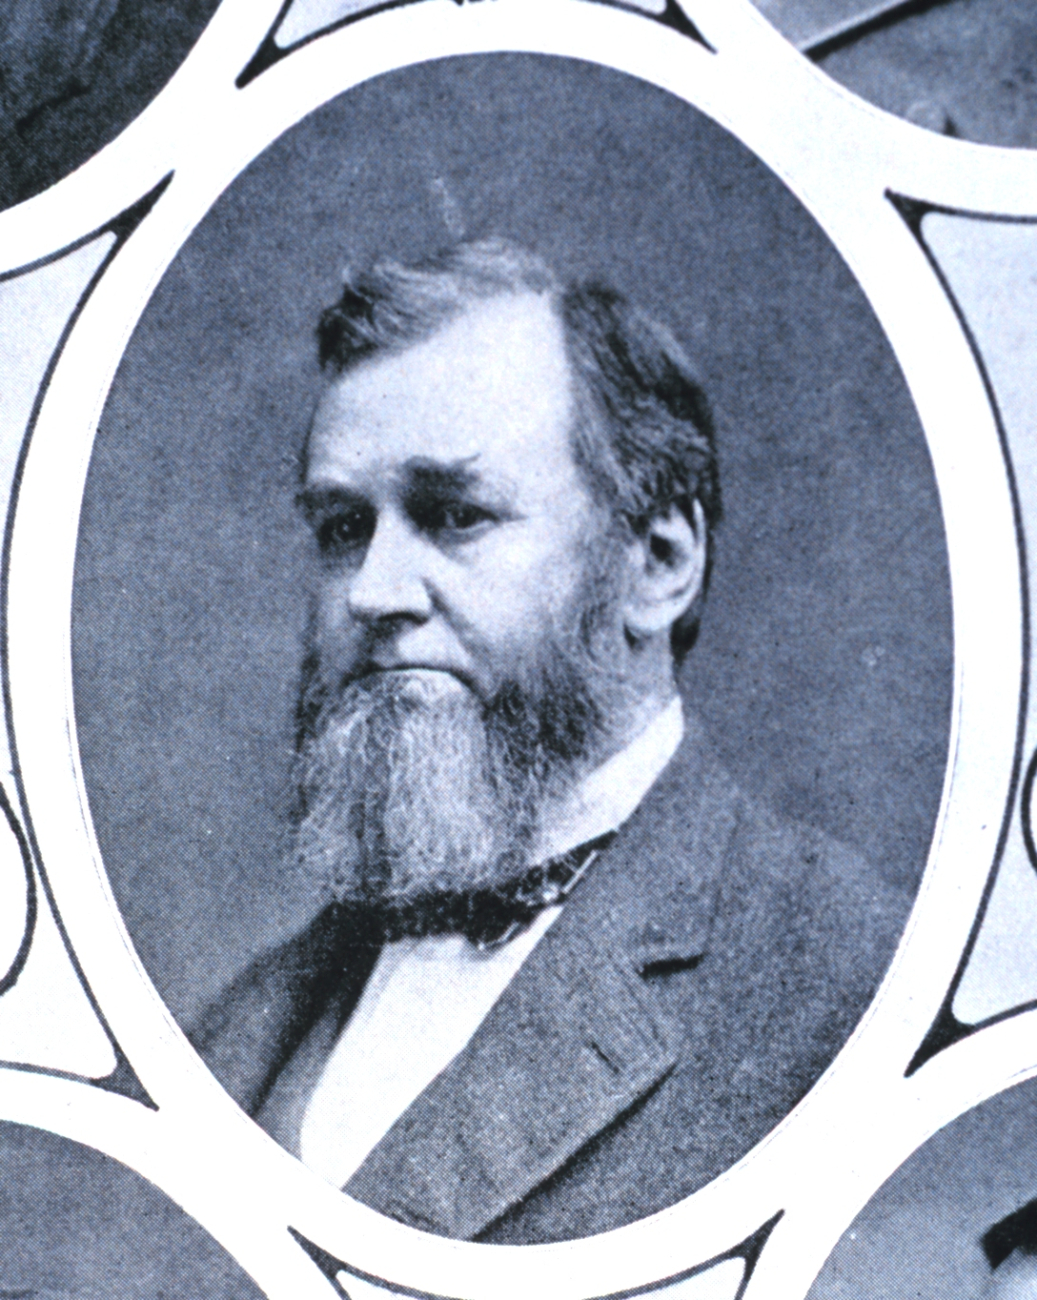 Spencer Fullerton Baird, first United States Commissioner of Fisheries, tenure1871-1878